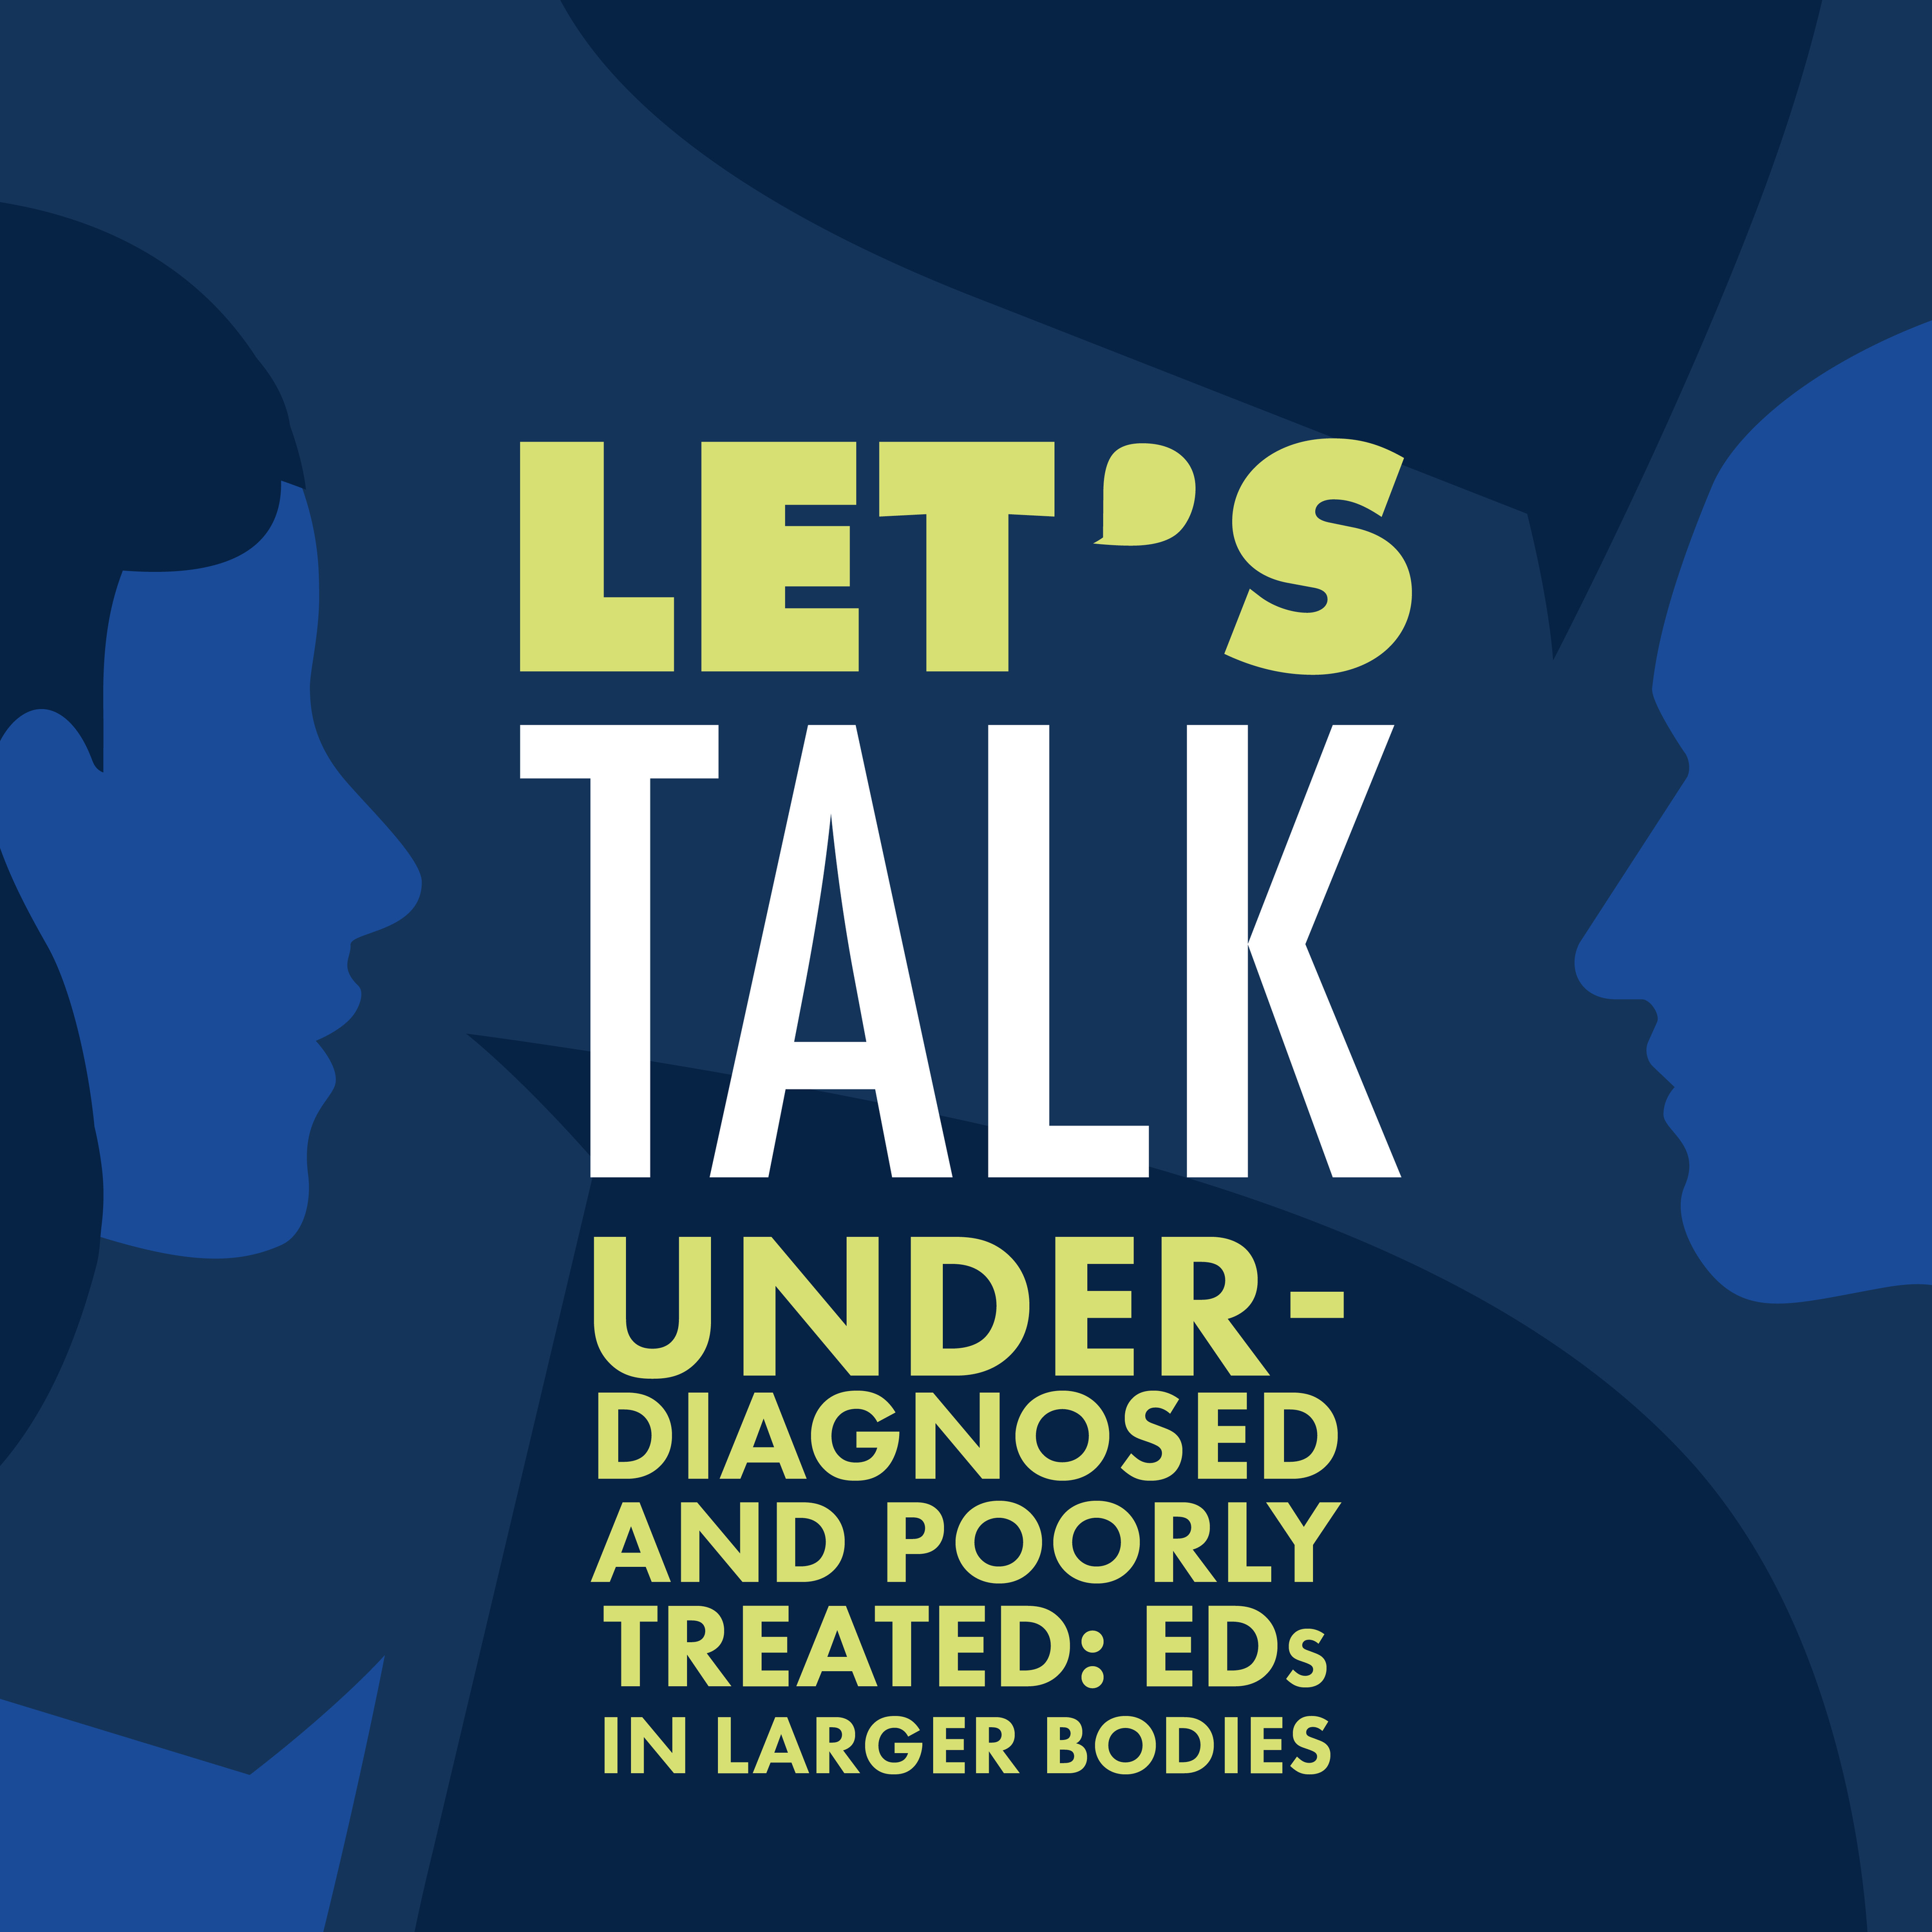 Under-diagnosed and poorly treated: Eating disorders in larger bodies